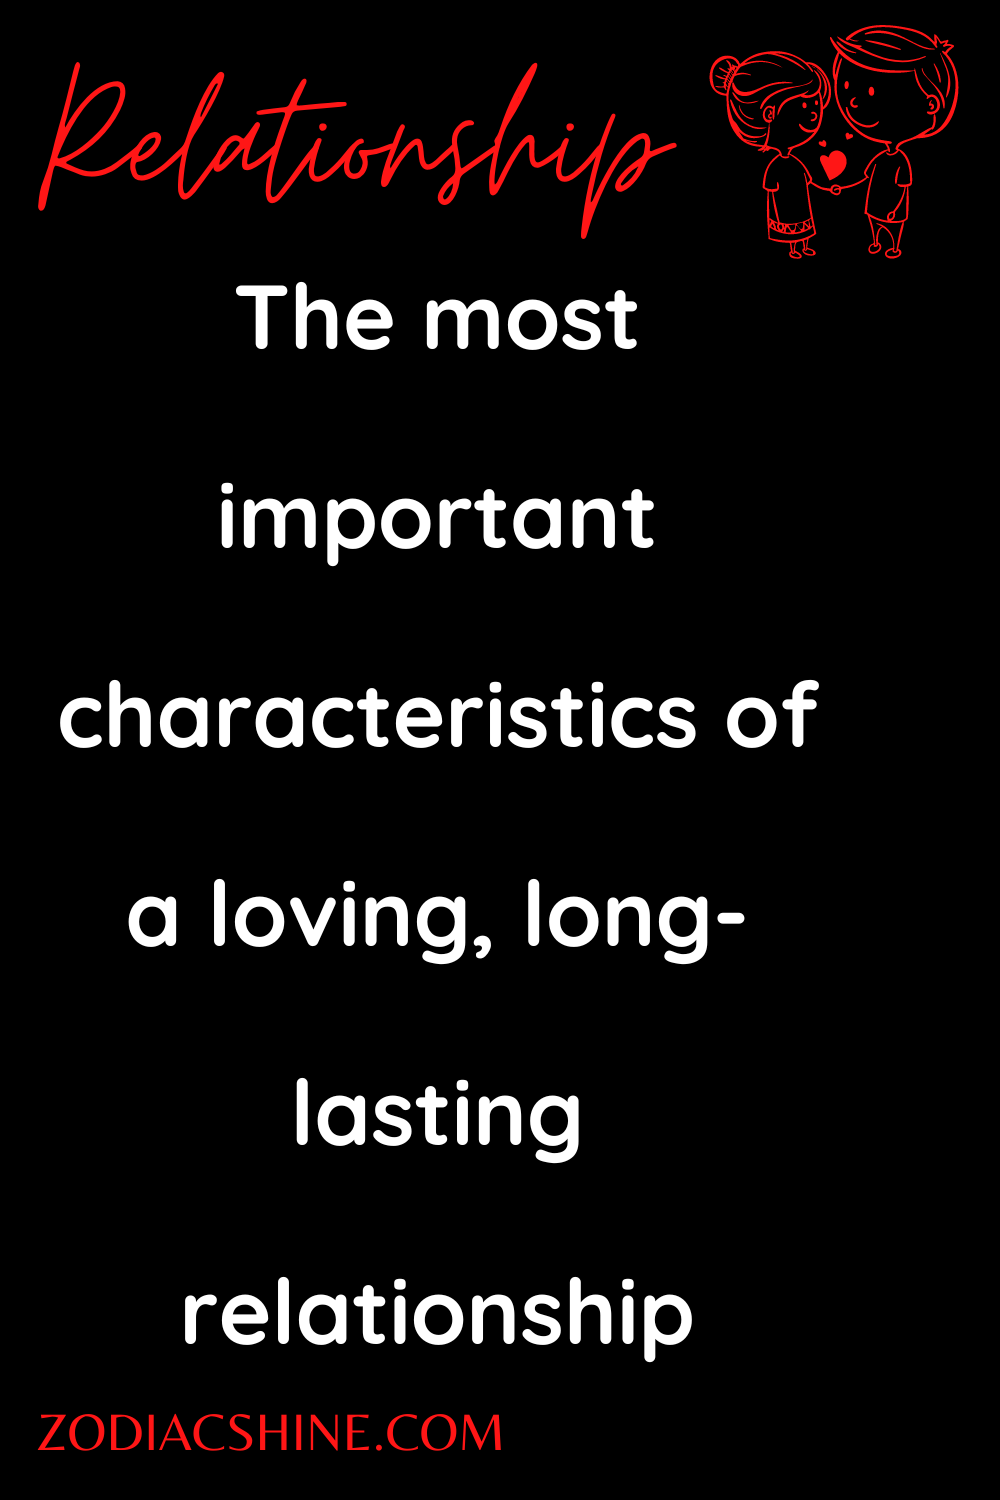 The most important characteristics of a loving, long-lasting relationship